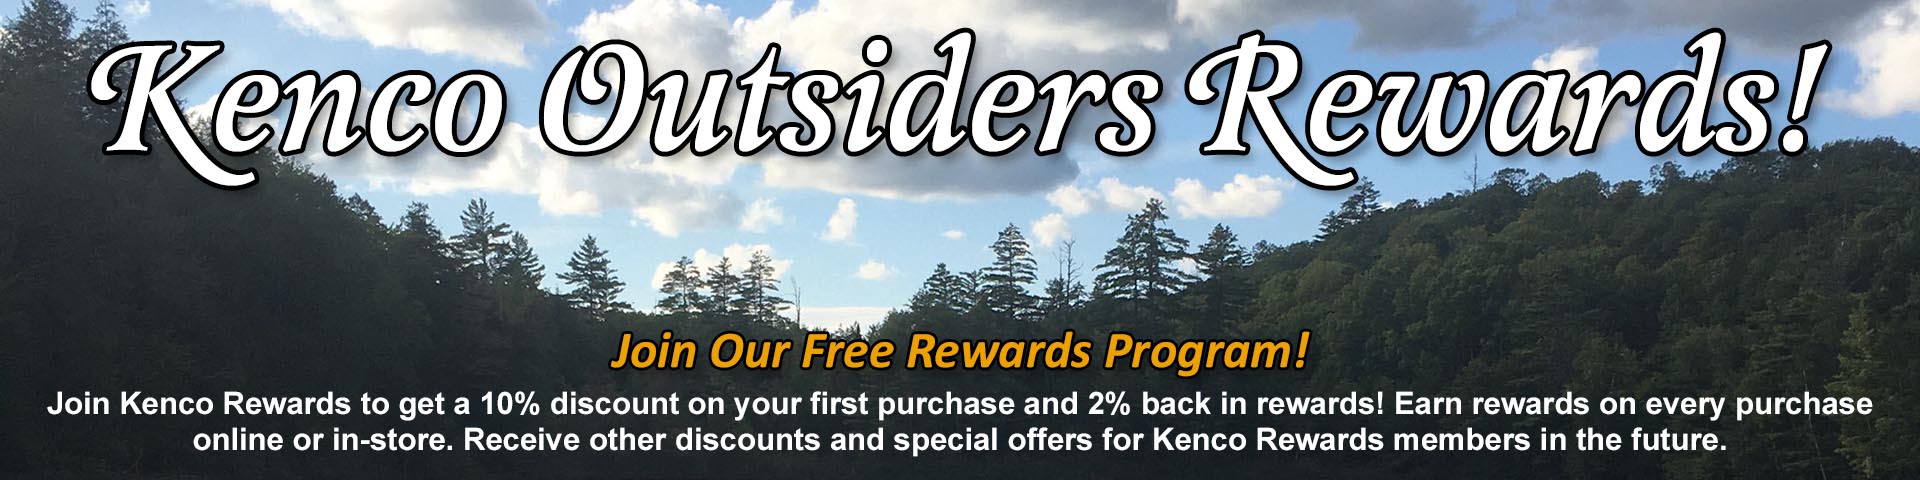 Join Kenco Rewards to get a 10% discount on your first purchase and 2% back in rewards! Earn rewards on every purchase online or in-store. Receive other discounts and special offers for Kenco Rewards members in the future.